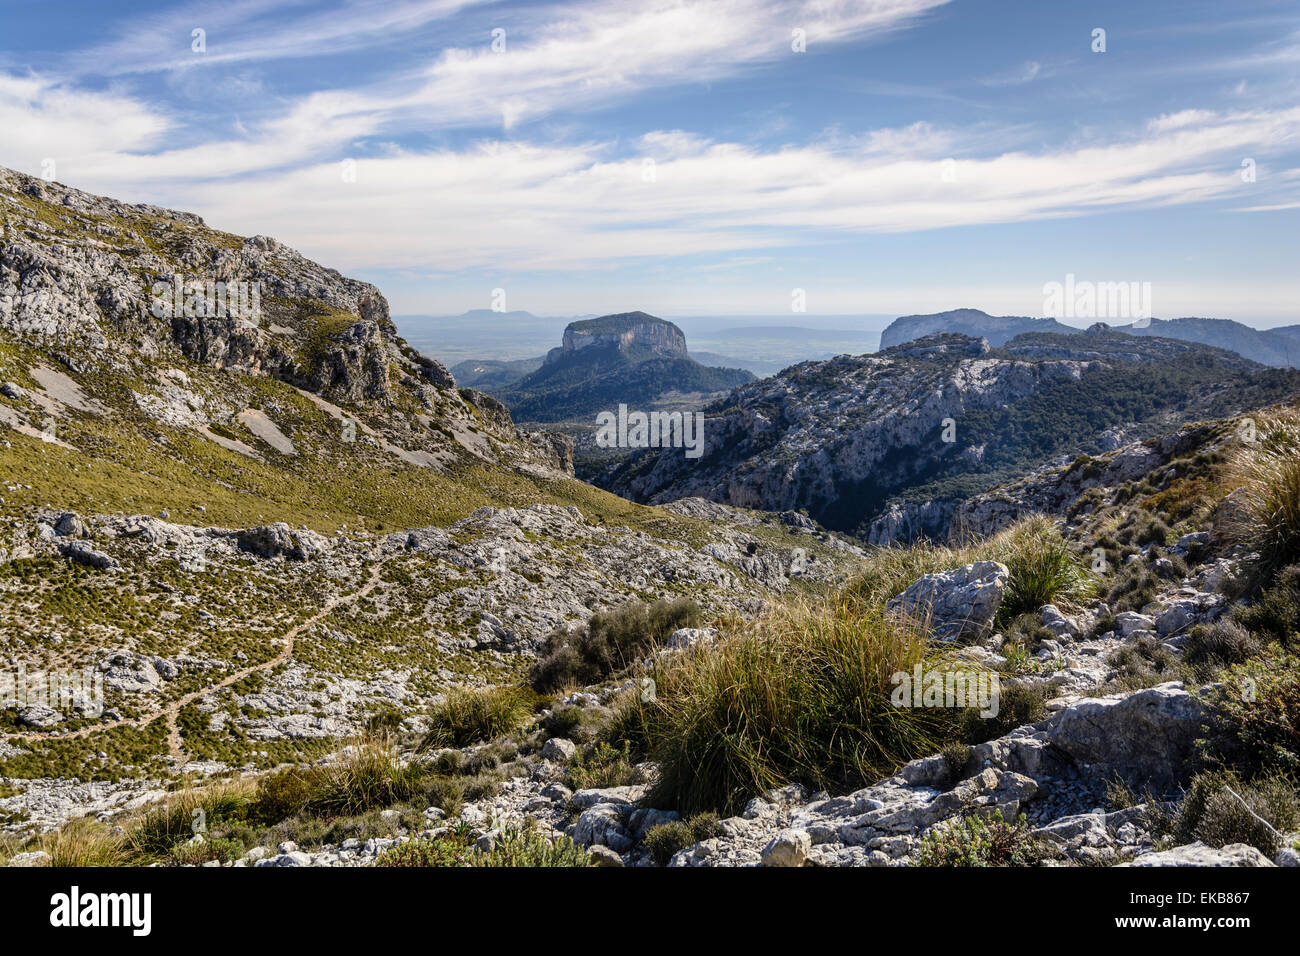 View of the Tossals Verds massif and to Table Mountain Puig de s' Alcadena, Mallorca, Balearic Islands, Spain Stock Photo